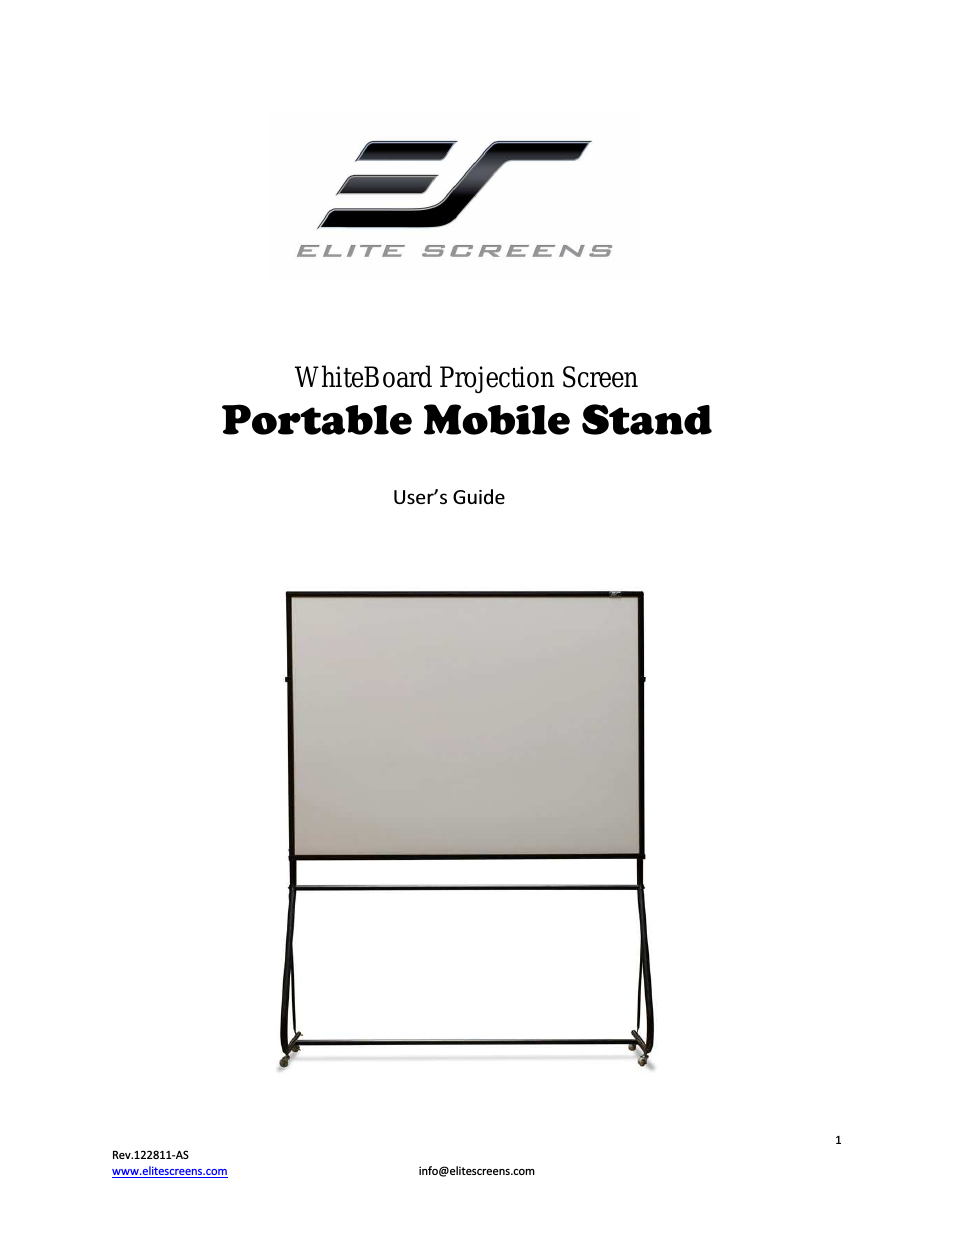 Portable Mobile Stand